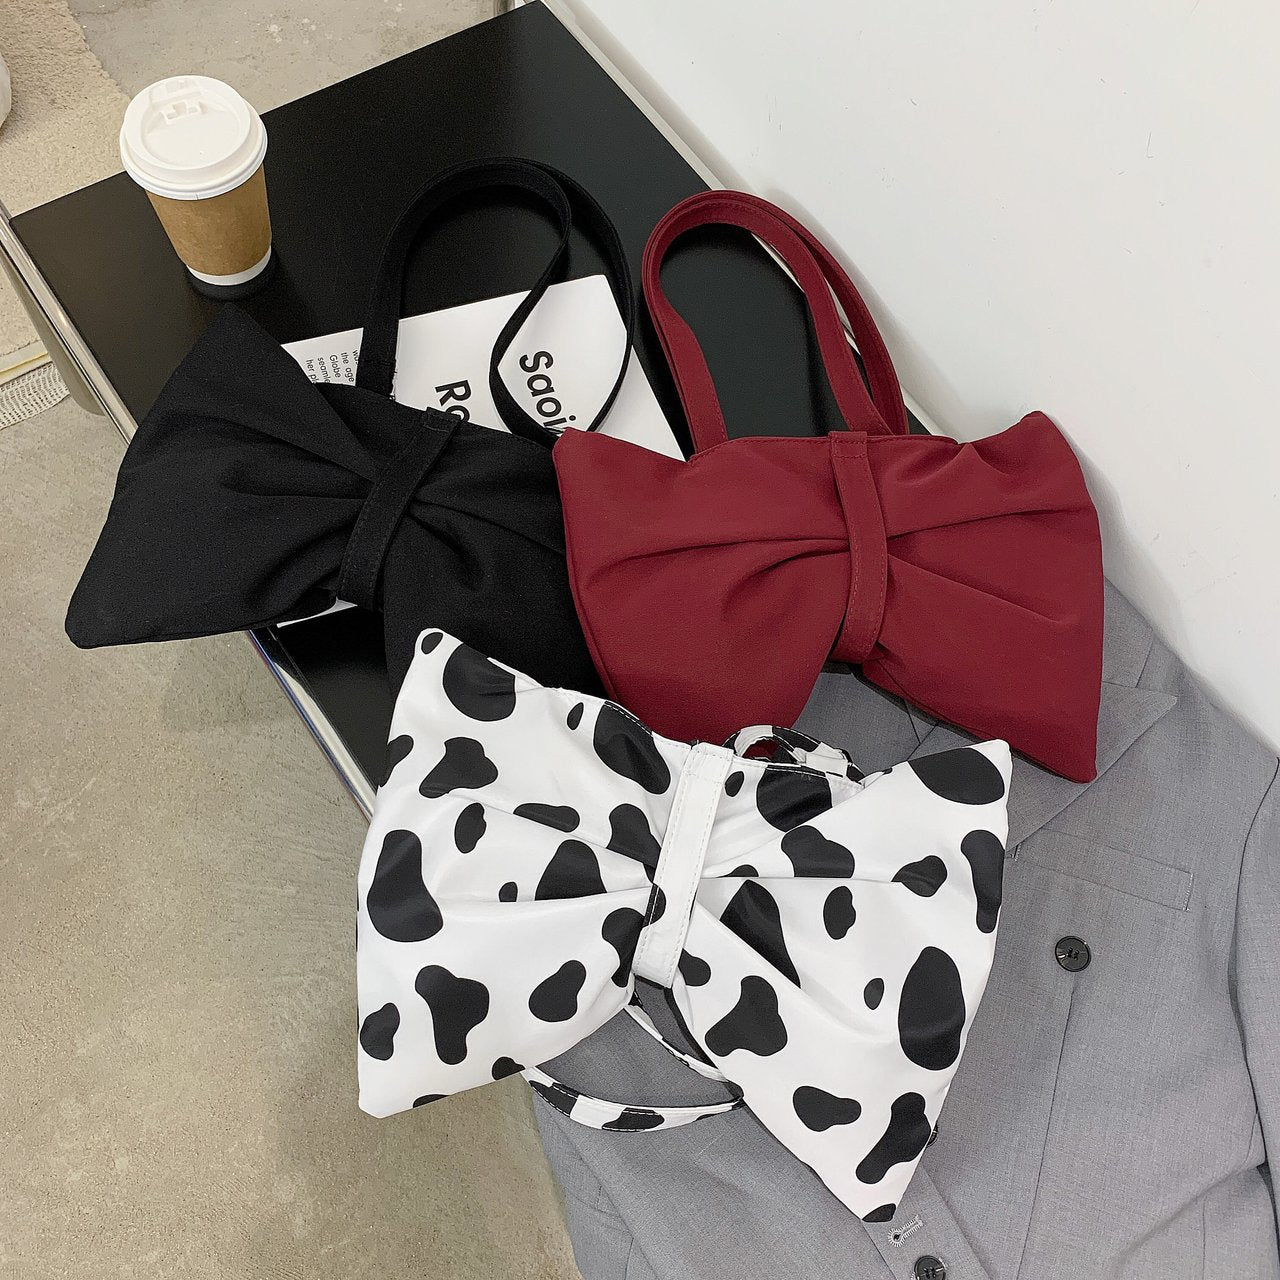 Fashion Large Bow Shoulder Bag For Girls Cute Cow Print Crossbody Bags Women Lovely Shopping Bags